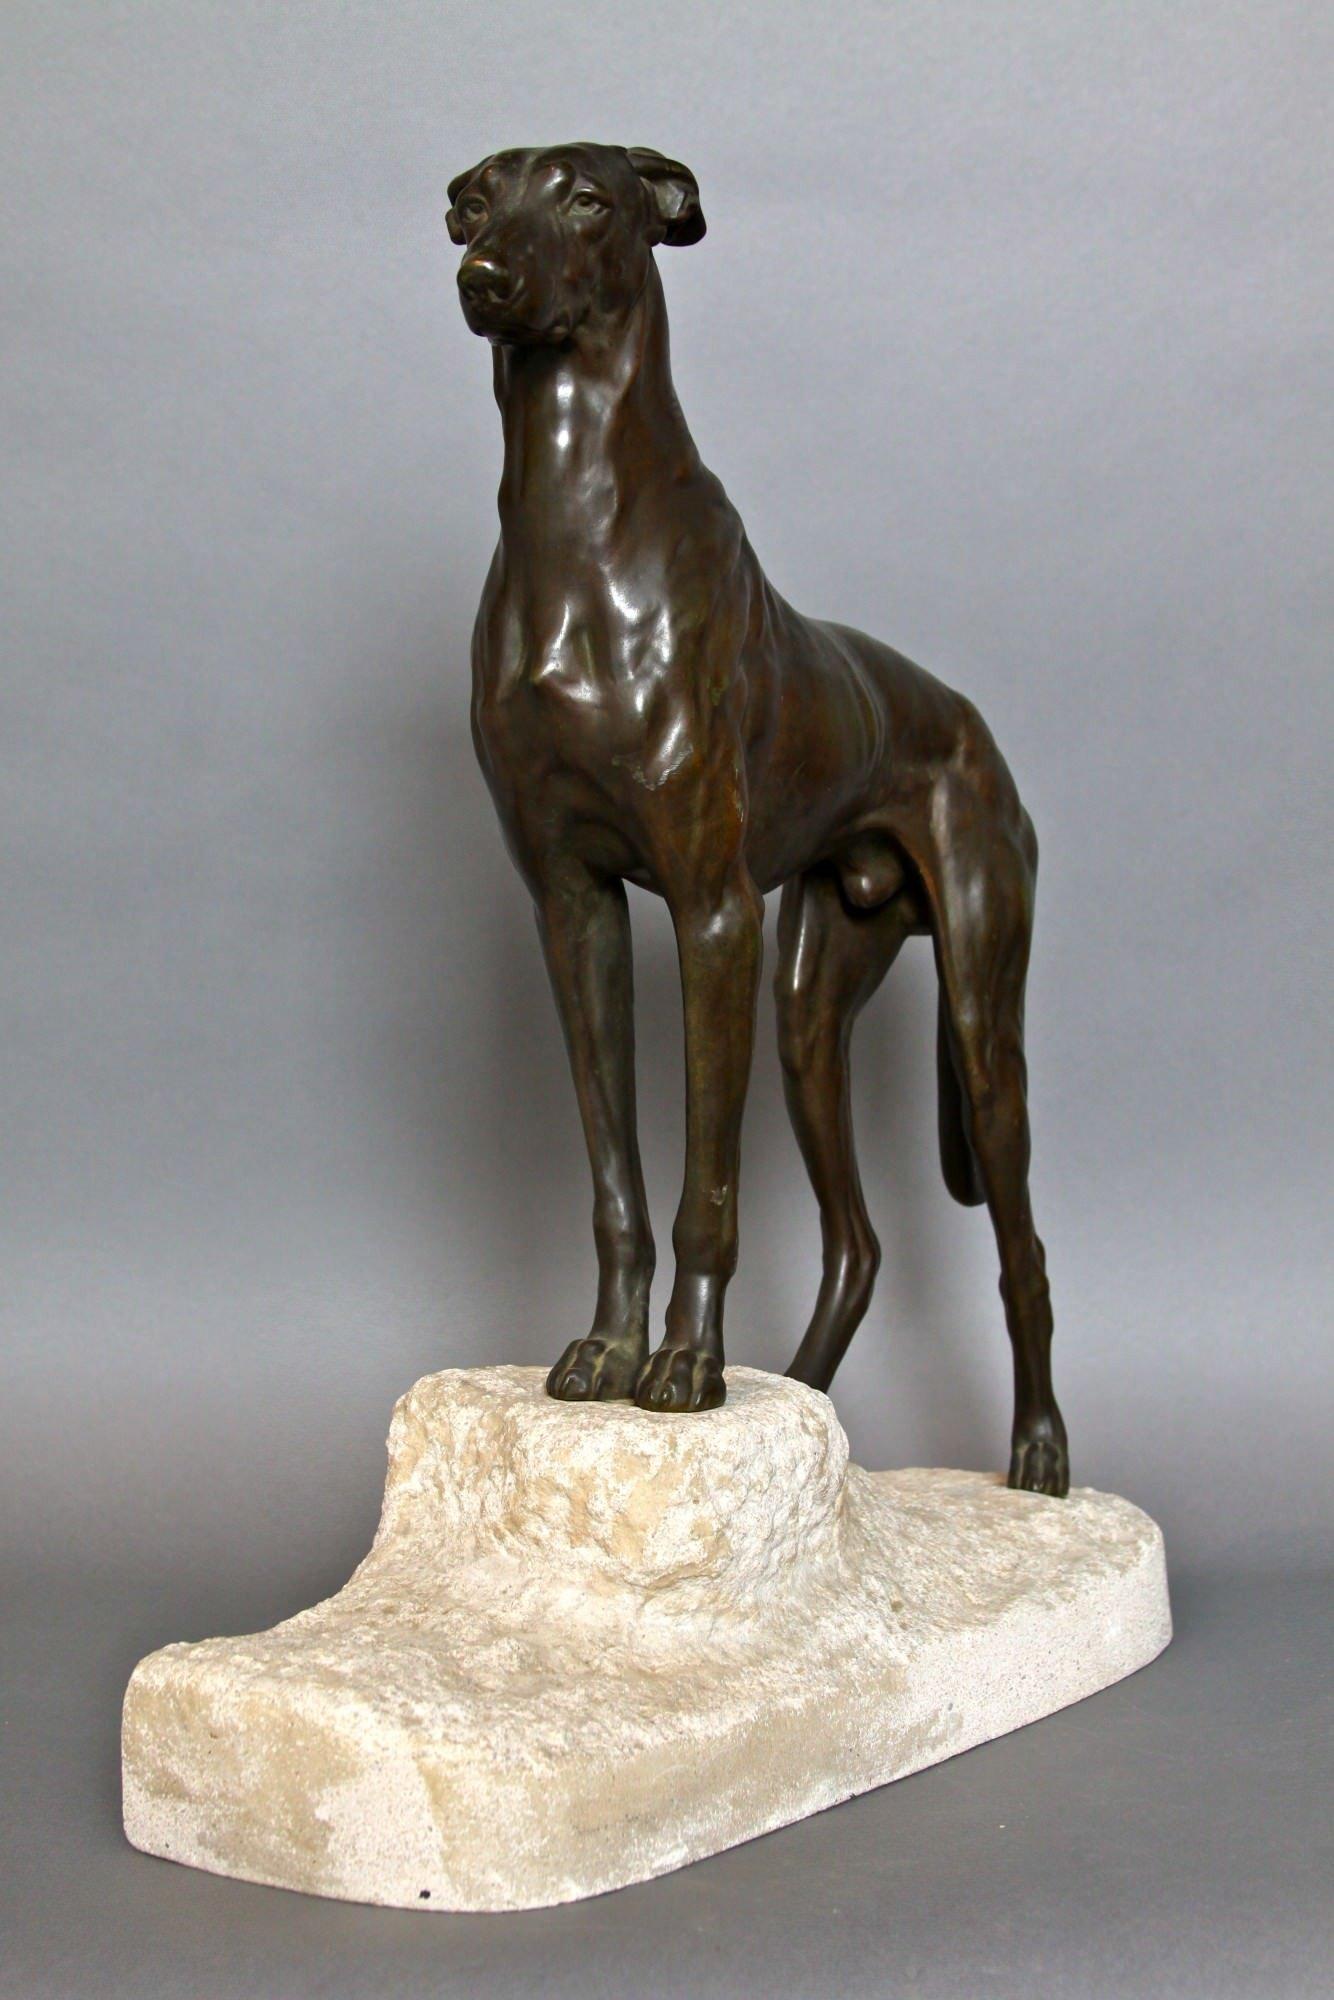 Jules Edmond Masson (French, 1871–1932)
Bronze Figure of a Lurcher Dog, 1930
Bronze with brownish green patination, on a fitted stone base
The base inset with a bronze plaque reading “J.E.Masson, Medaille d’Or, Salon des Artistes Francais, Edition